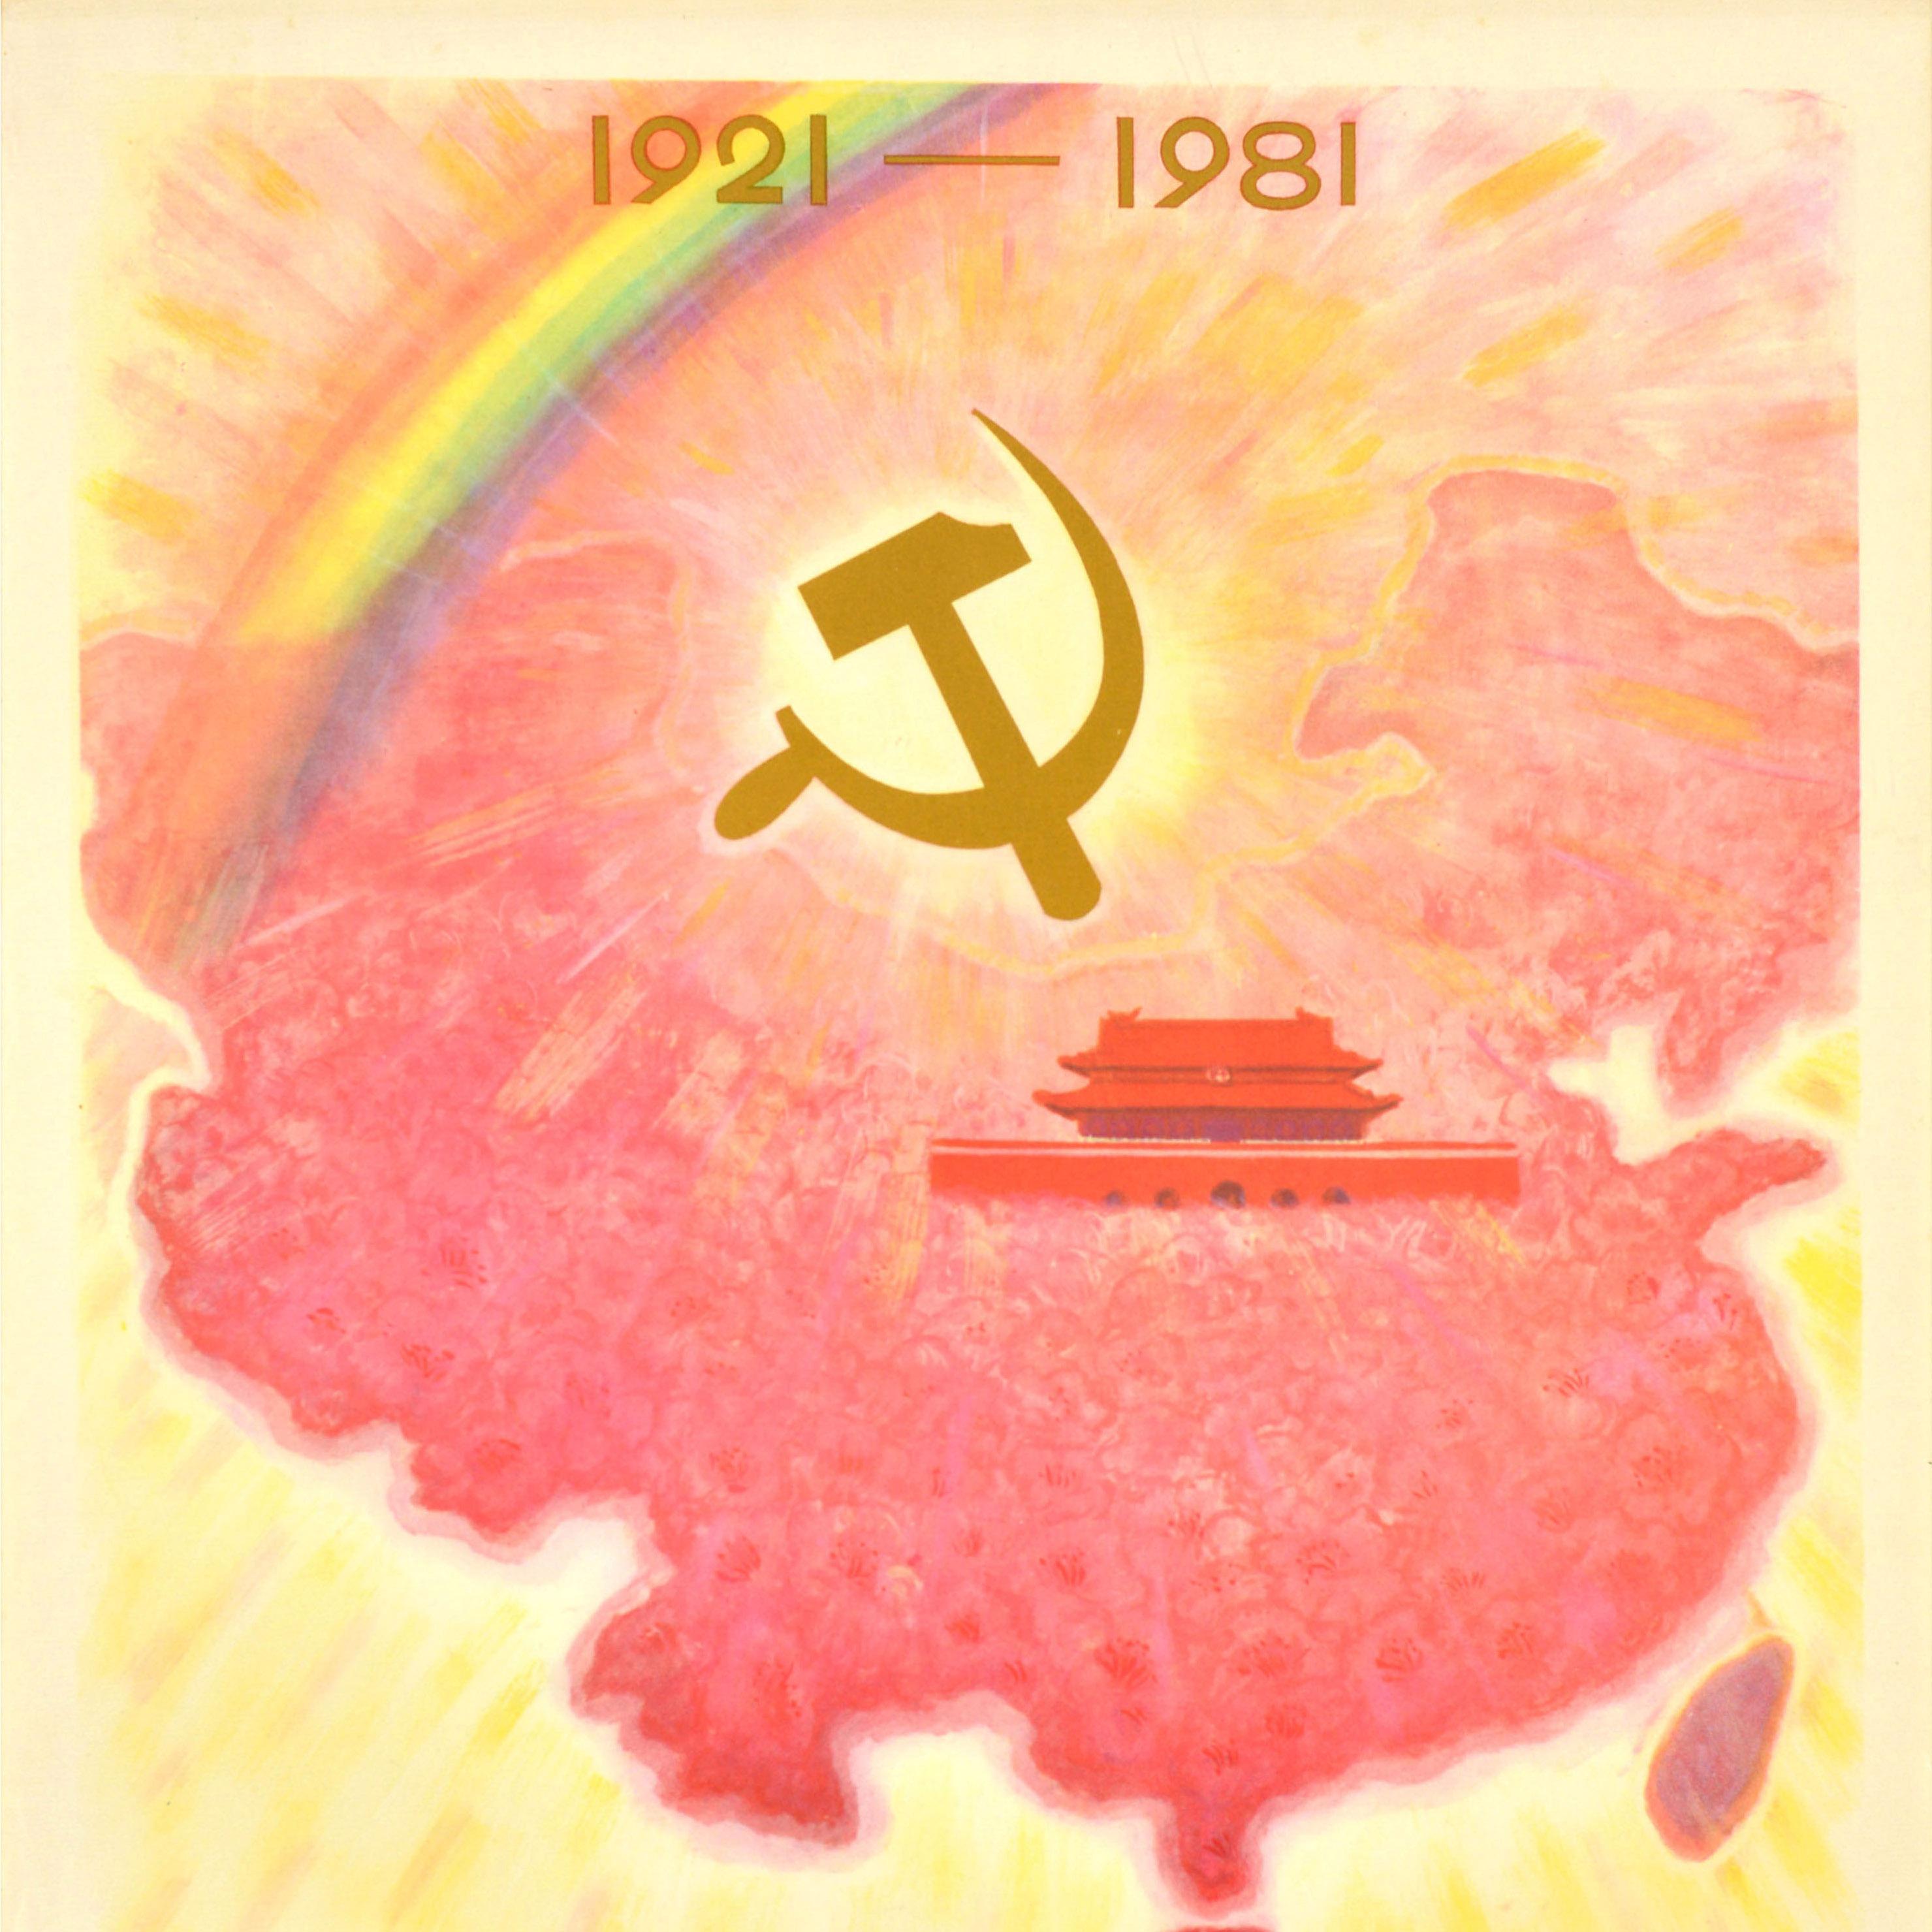 Original vintage Chinese Communist Party propaganda poster commemorating the 60th anniversary of the founding of the party: 1921-1981 Without the Communist Party There Would Be No New China / 没有共产党 就没有新中国 - featuring an illustration of a rainbow